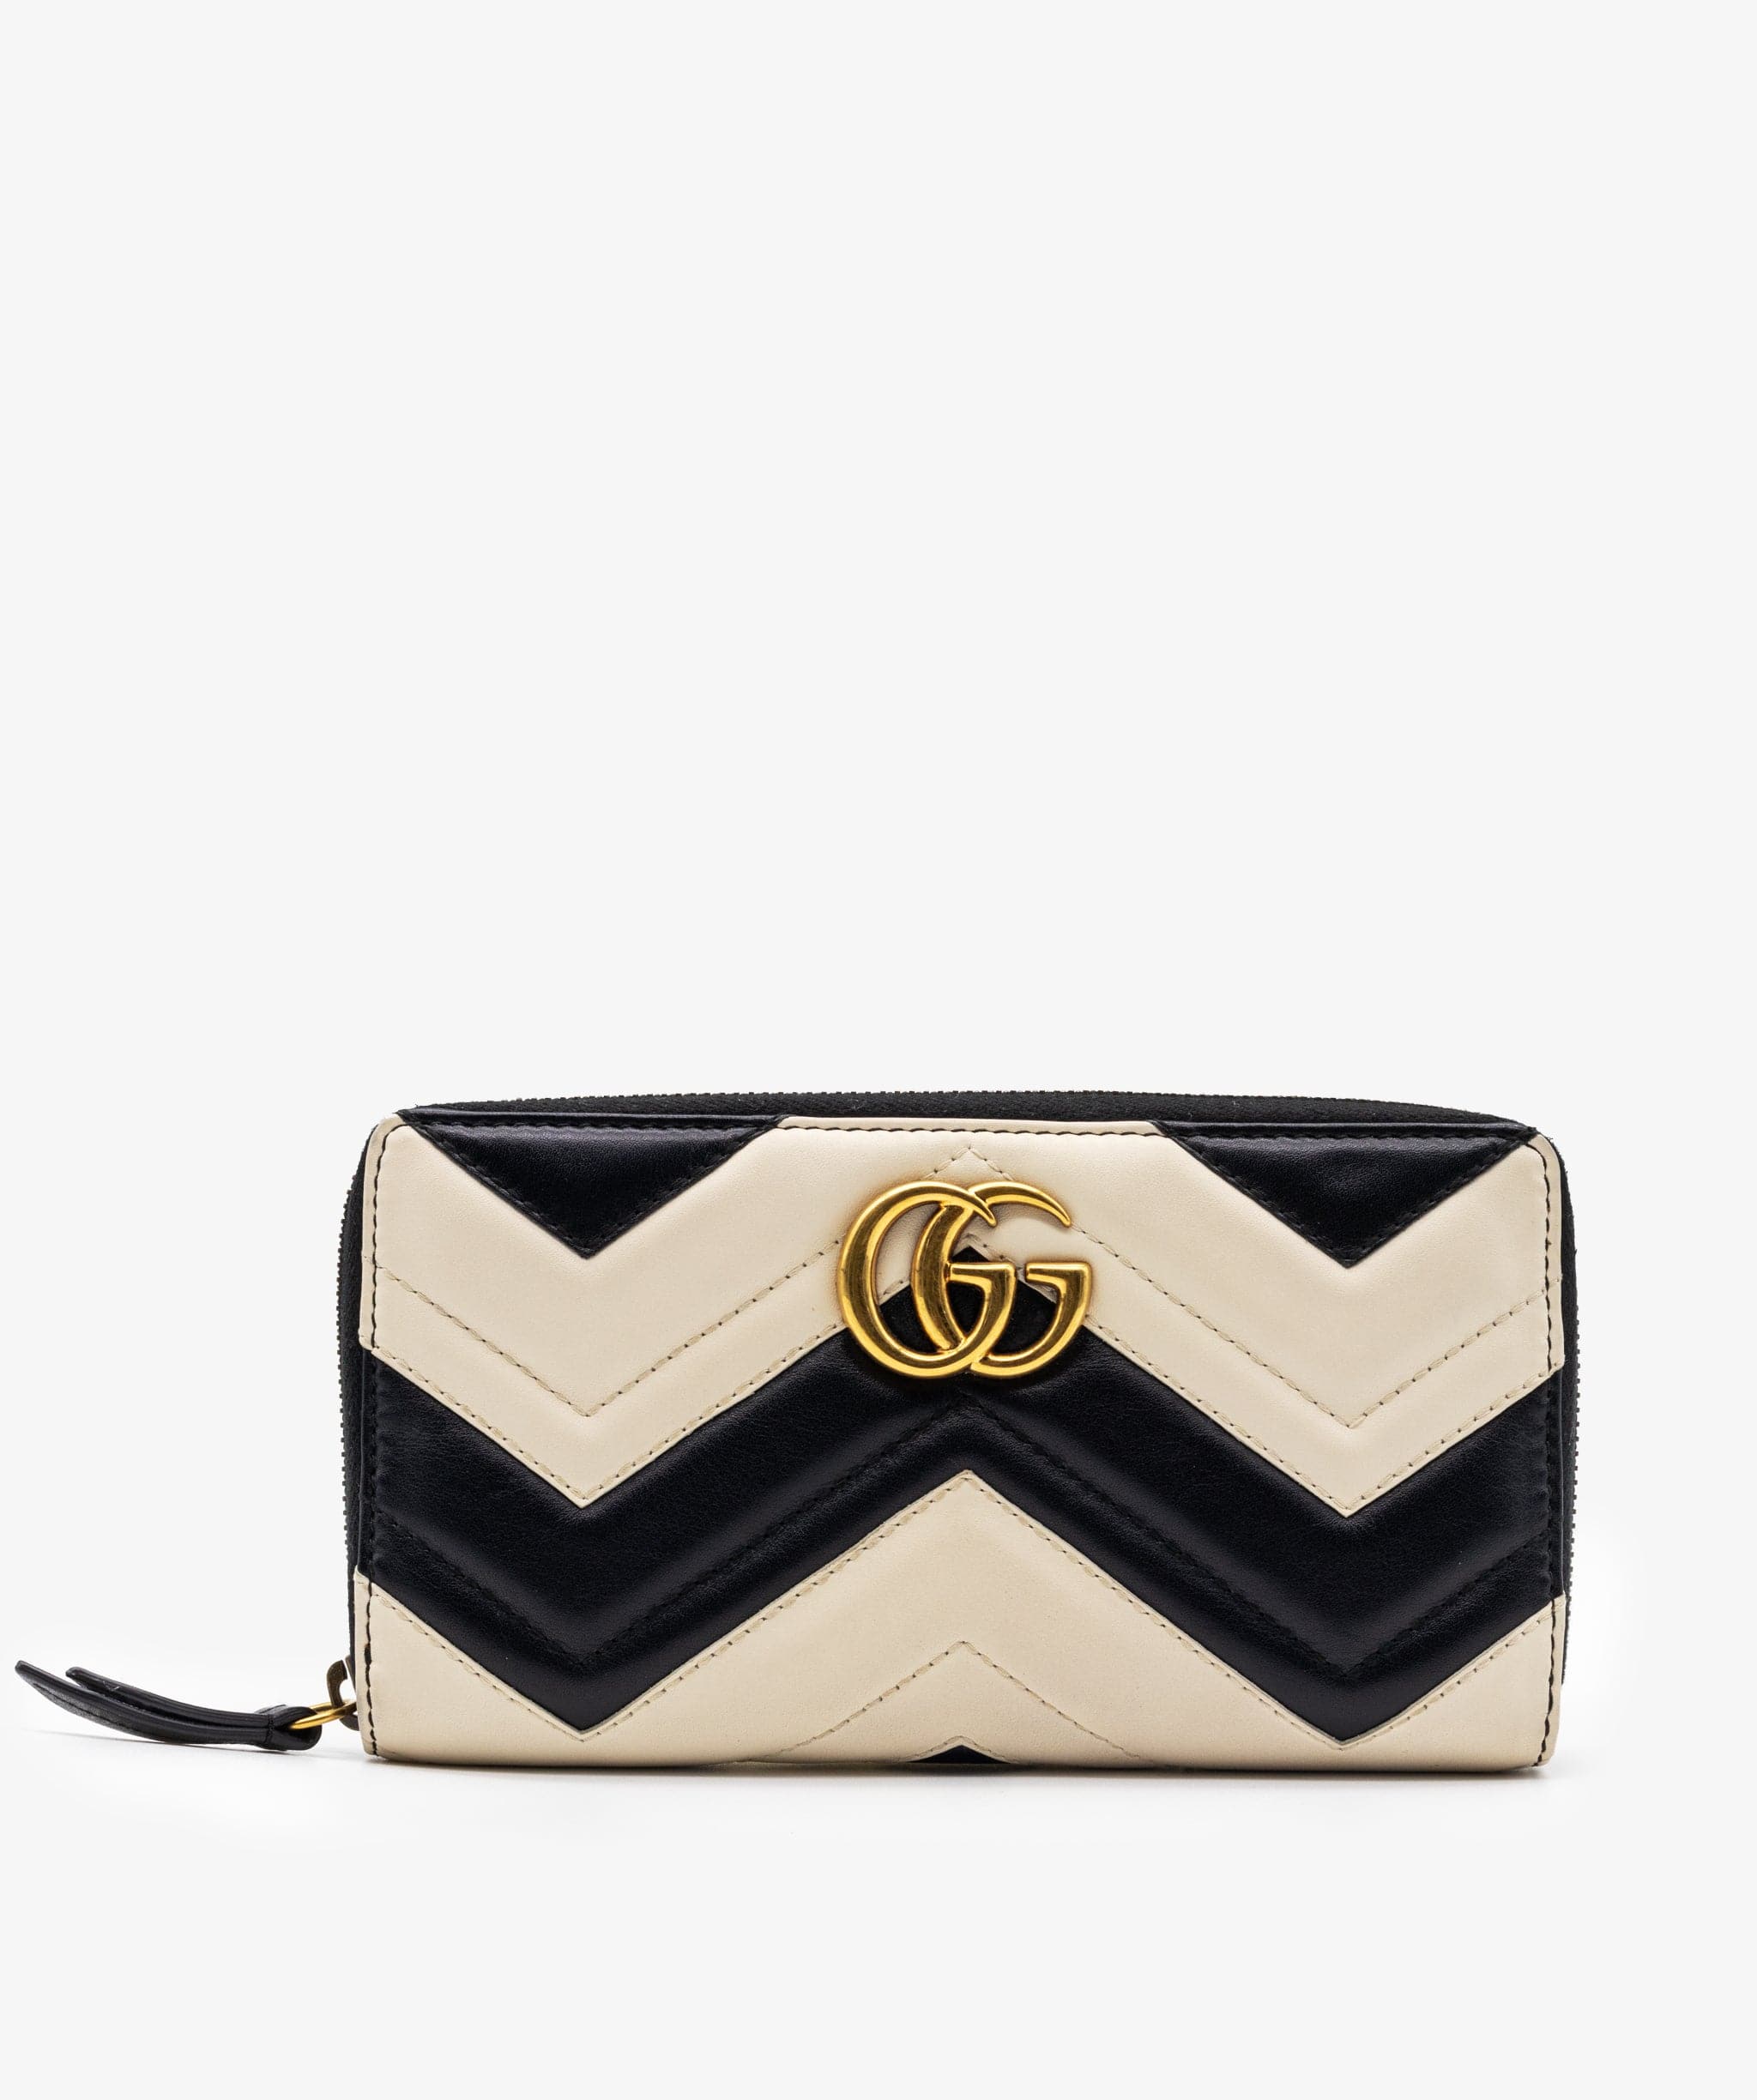 Gucci Gucci Marmont Black and White Wallet RJL1729